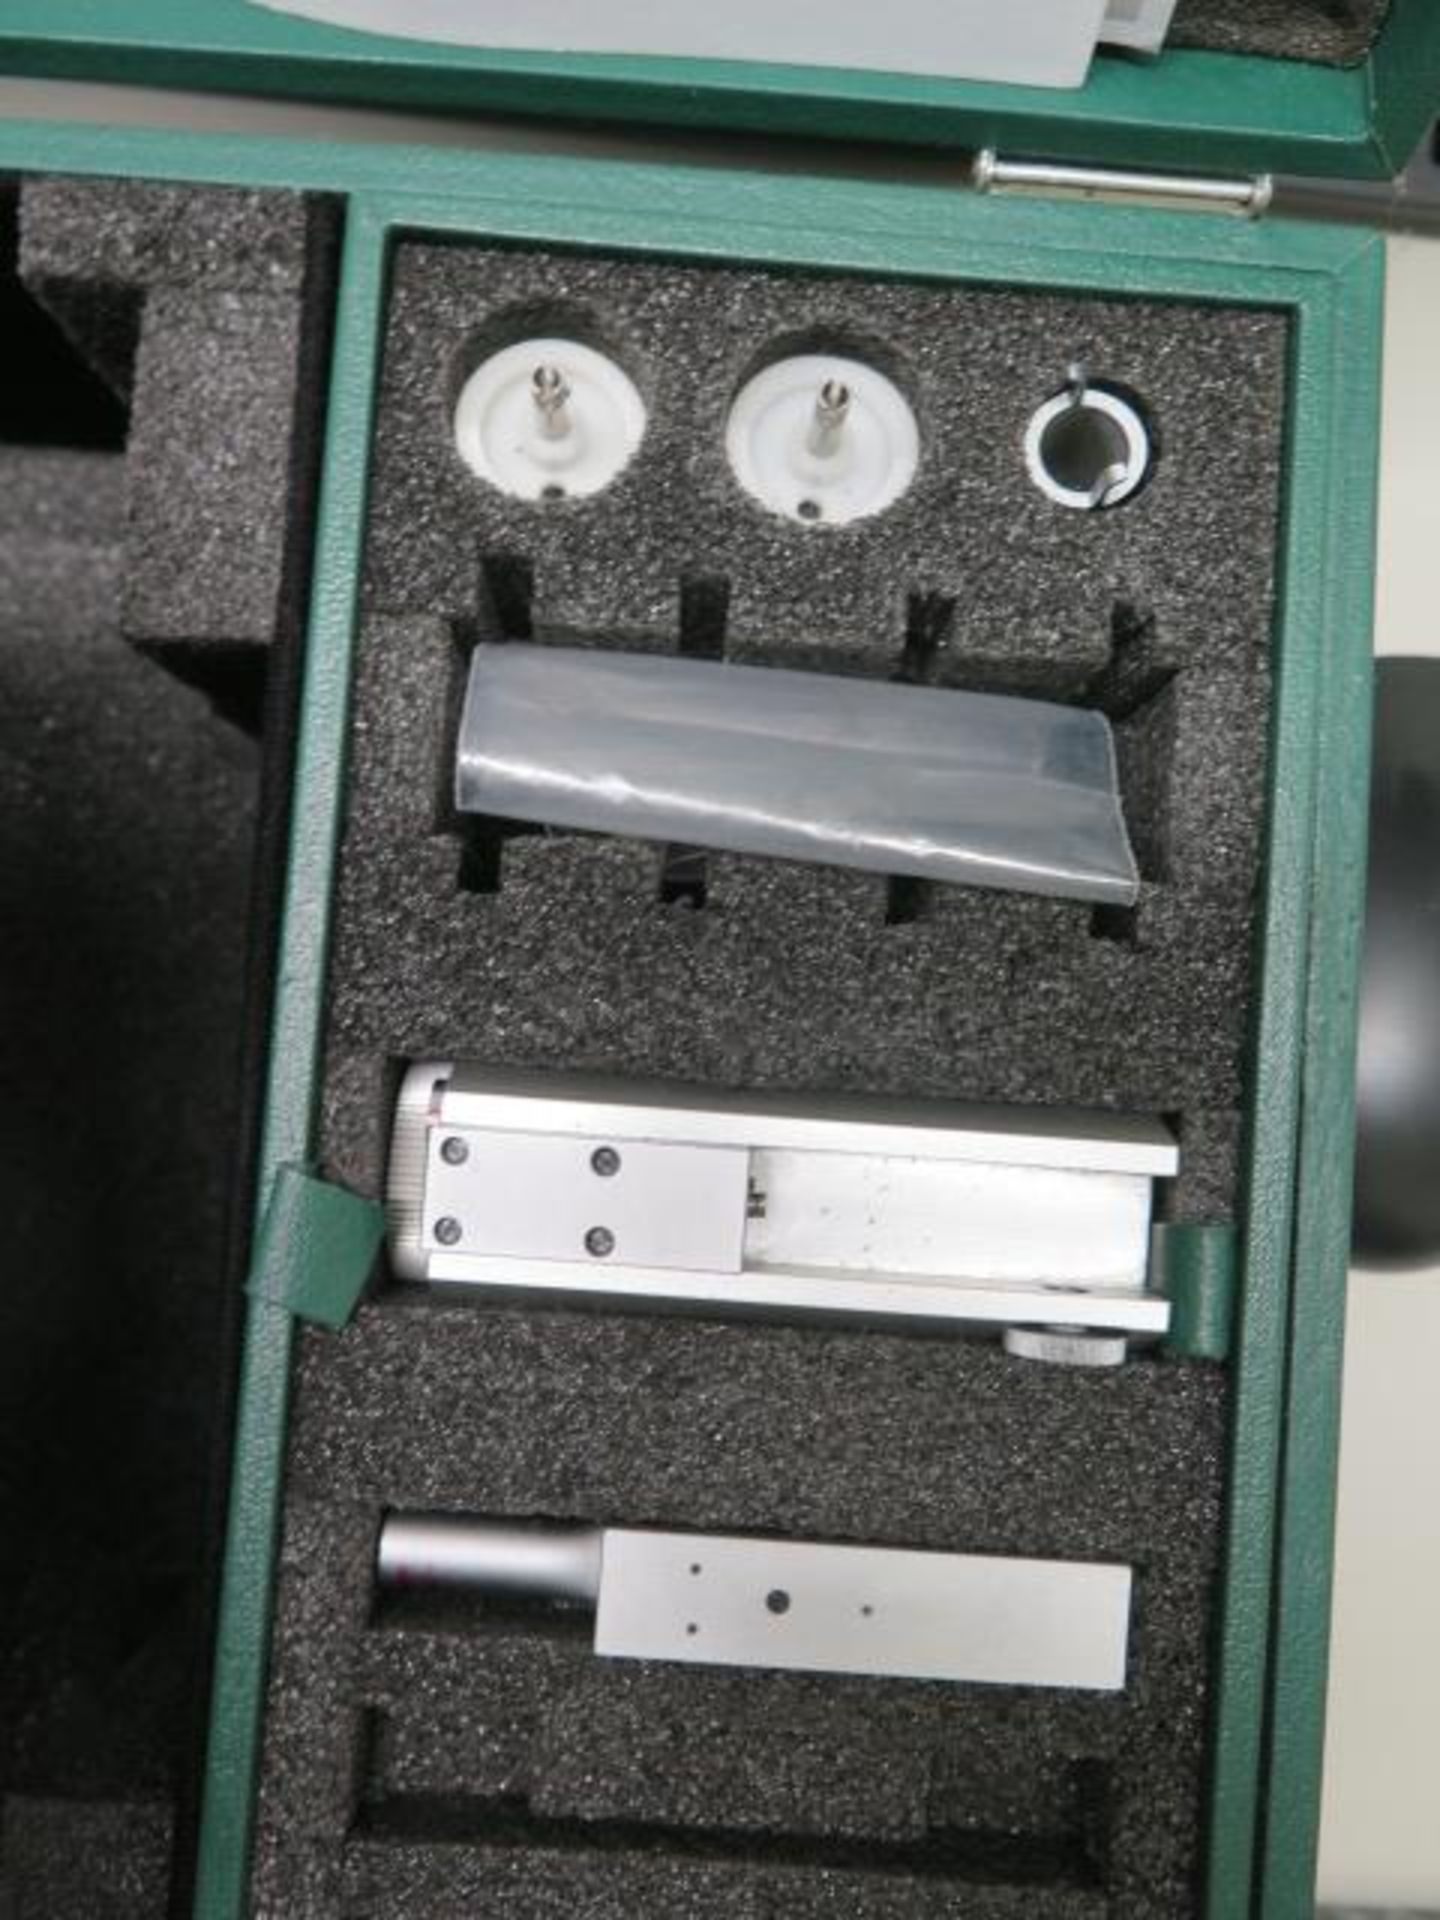 Microtester Diavite MT-30 Surface Roughness Gage (SOLD AS-IS - NO WARRANTY) - Image 4 of 5